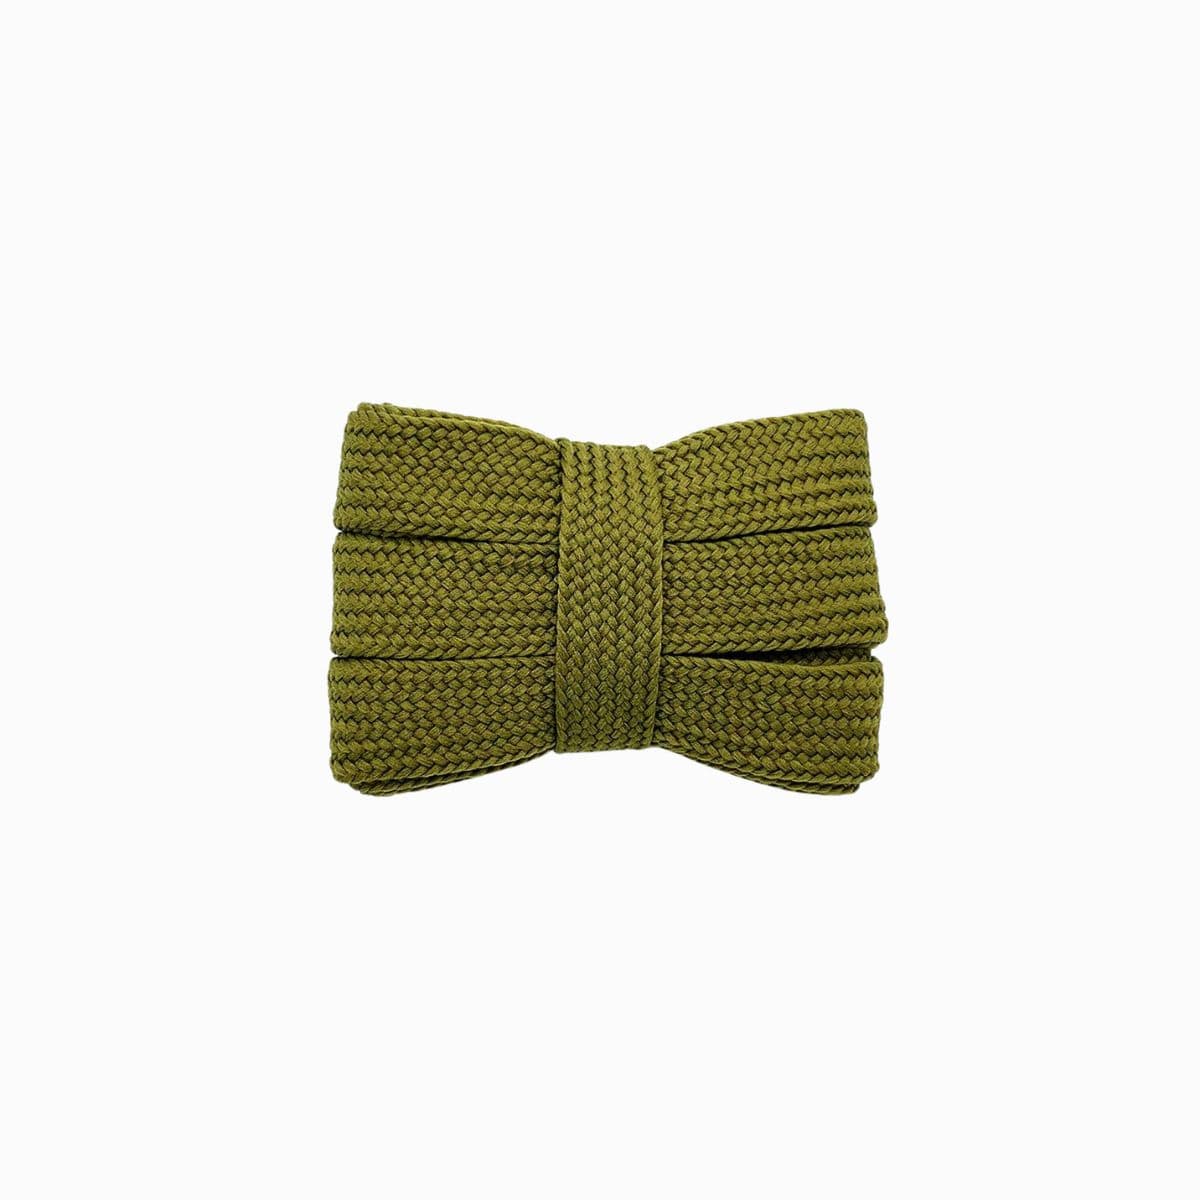 Olive Green Adidas Fat Laces Replacement shoelaces for Adidas Sneakers by Kicks Shoelaces